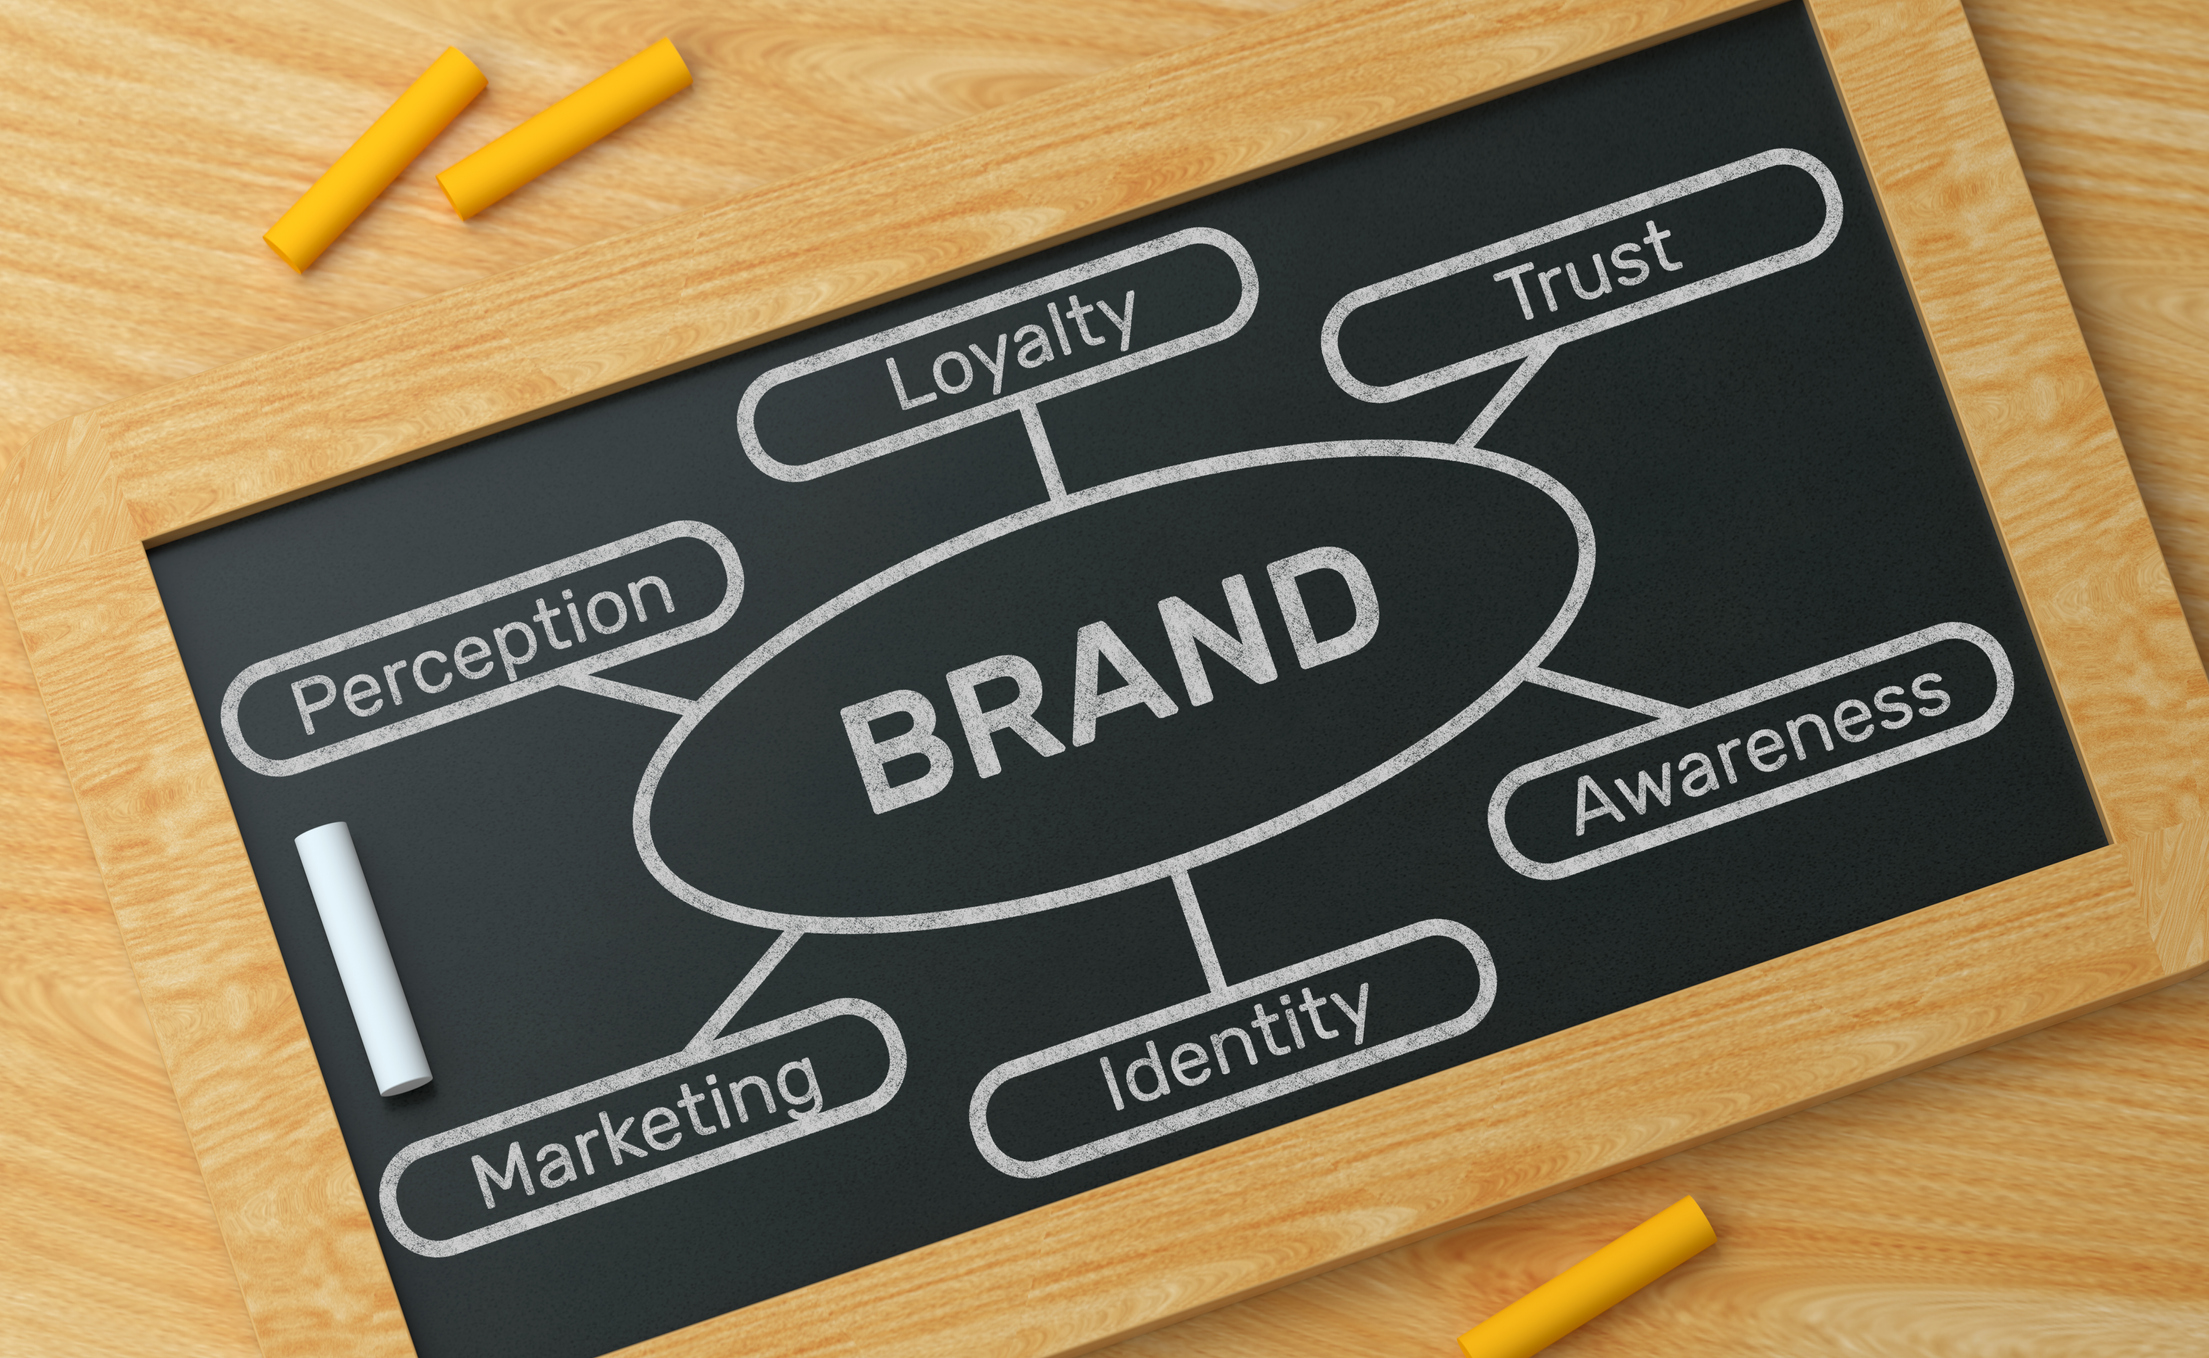 Brand awareness is a great metric to measure the success of your digital marketing strategy.